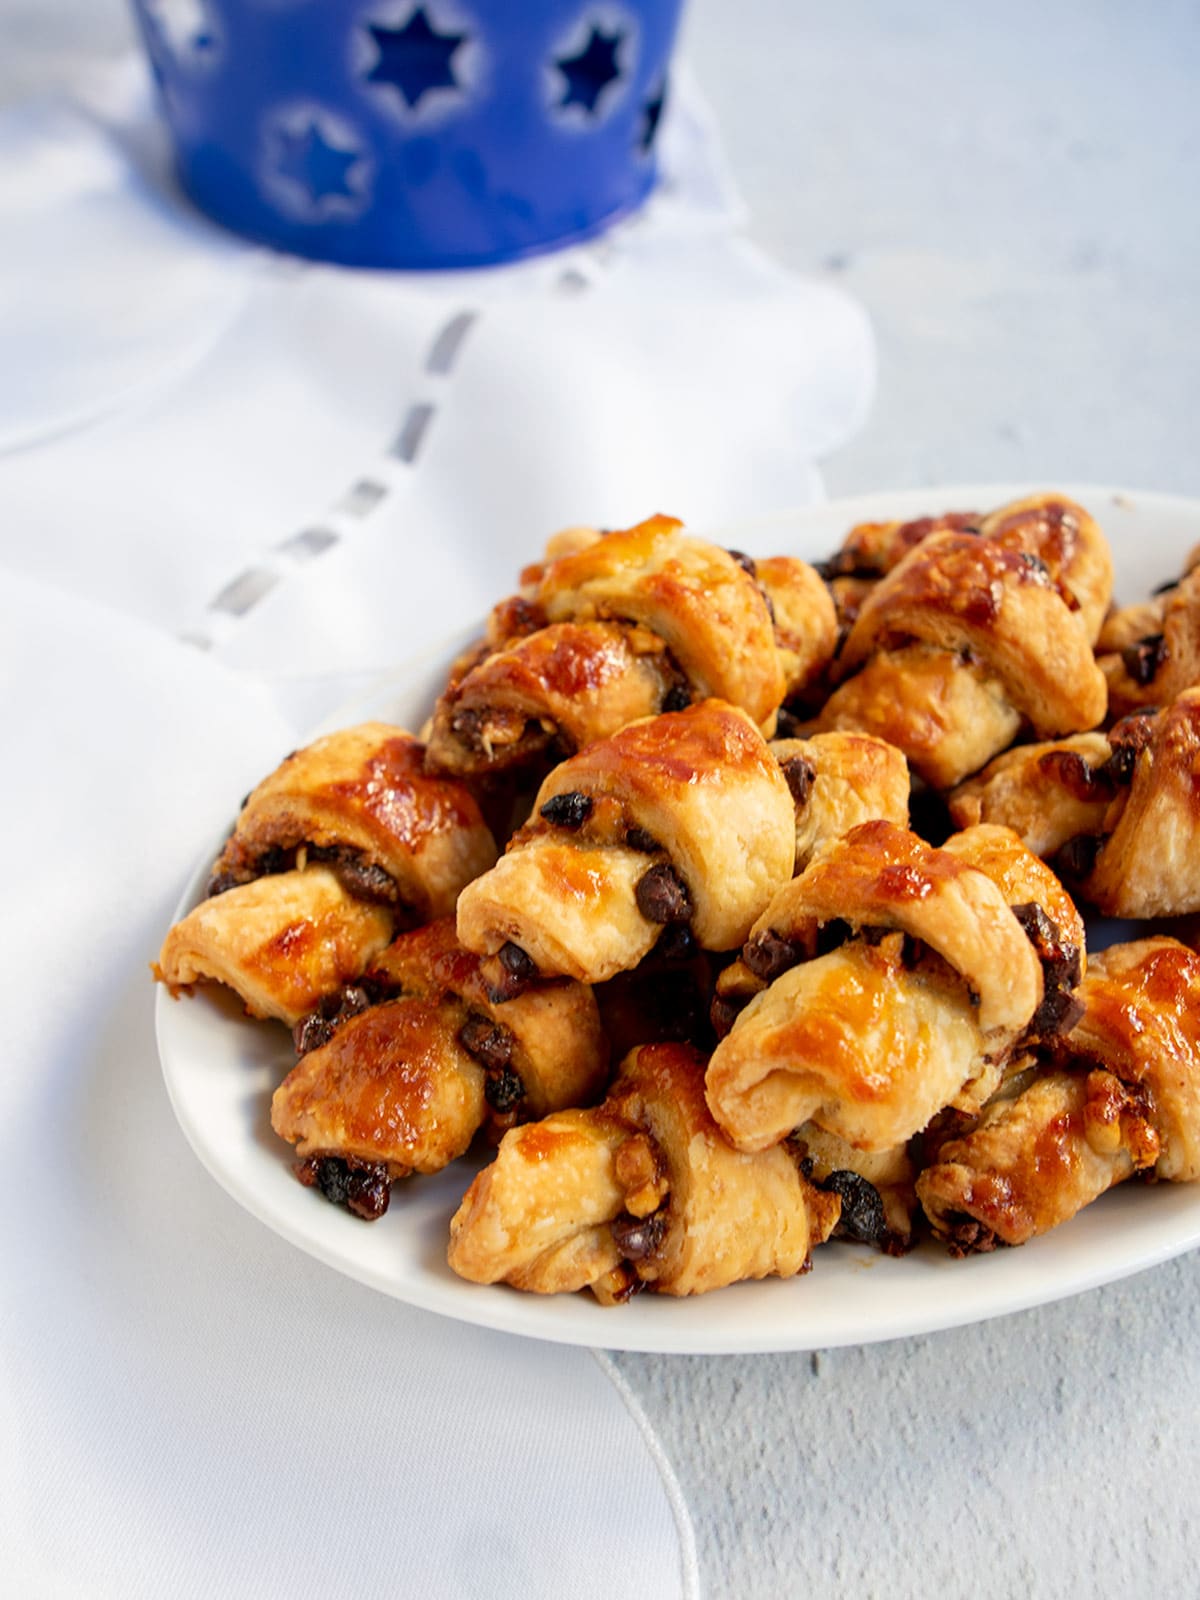 A plate of rugelach with Hanukkah decorations in the background.